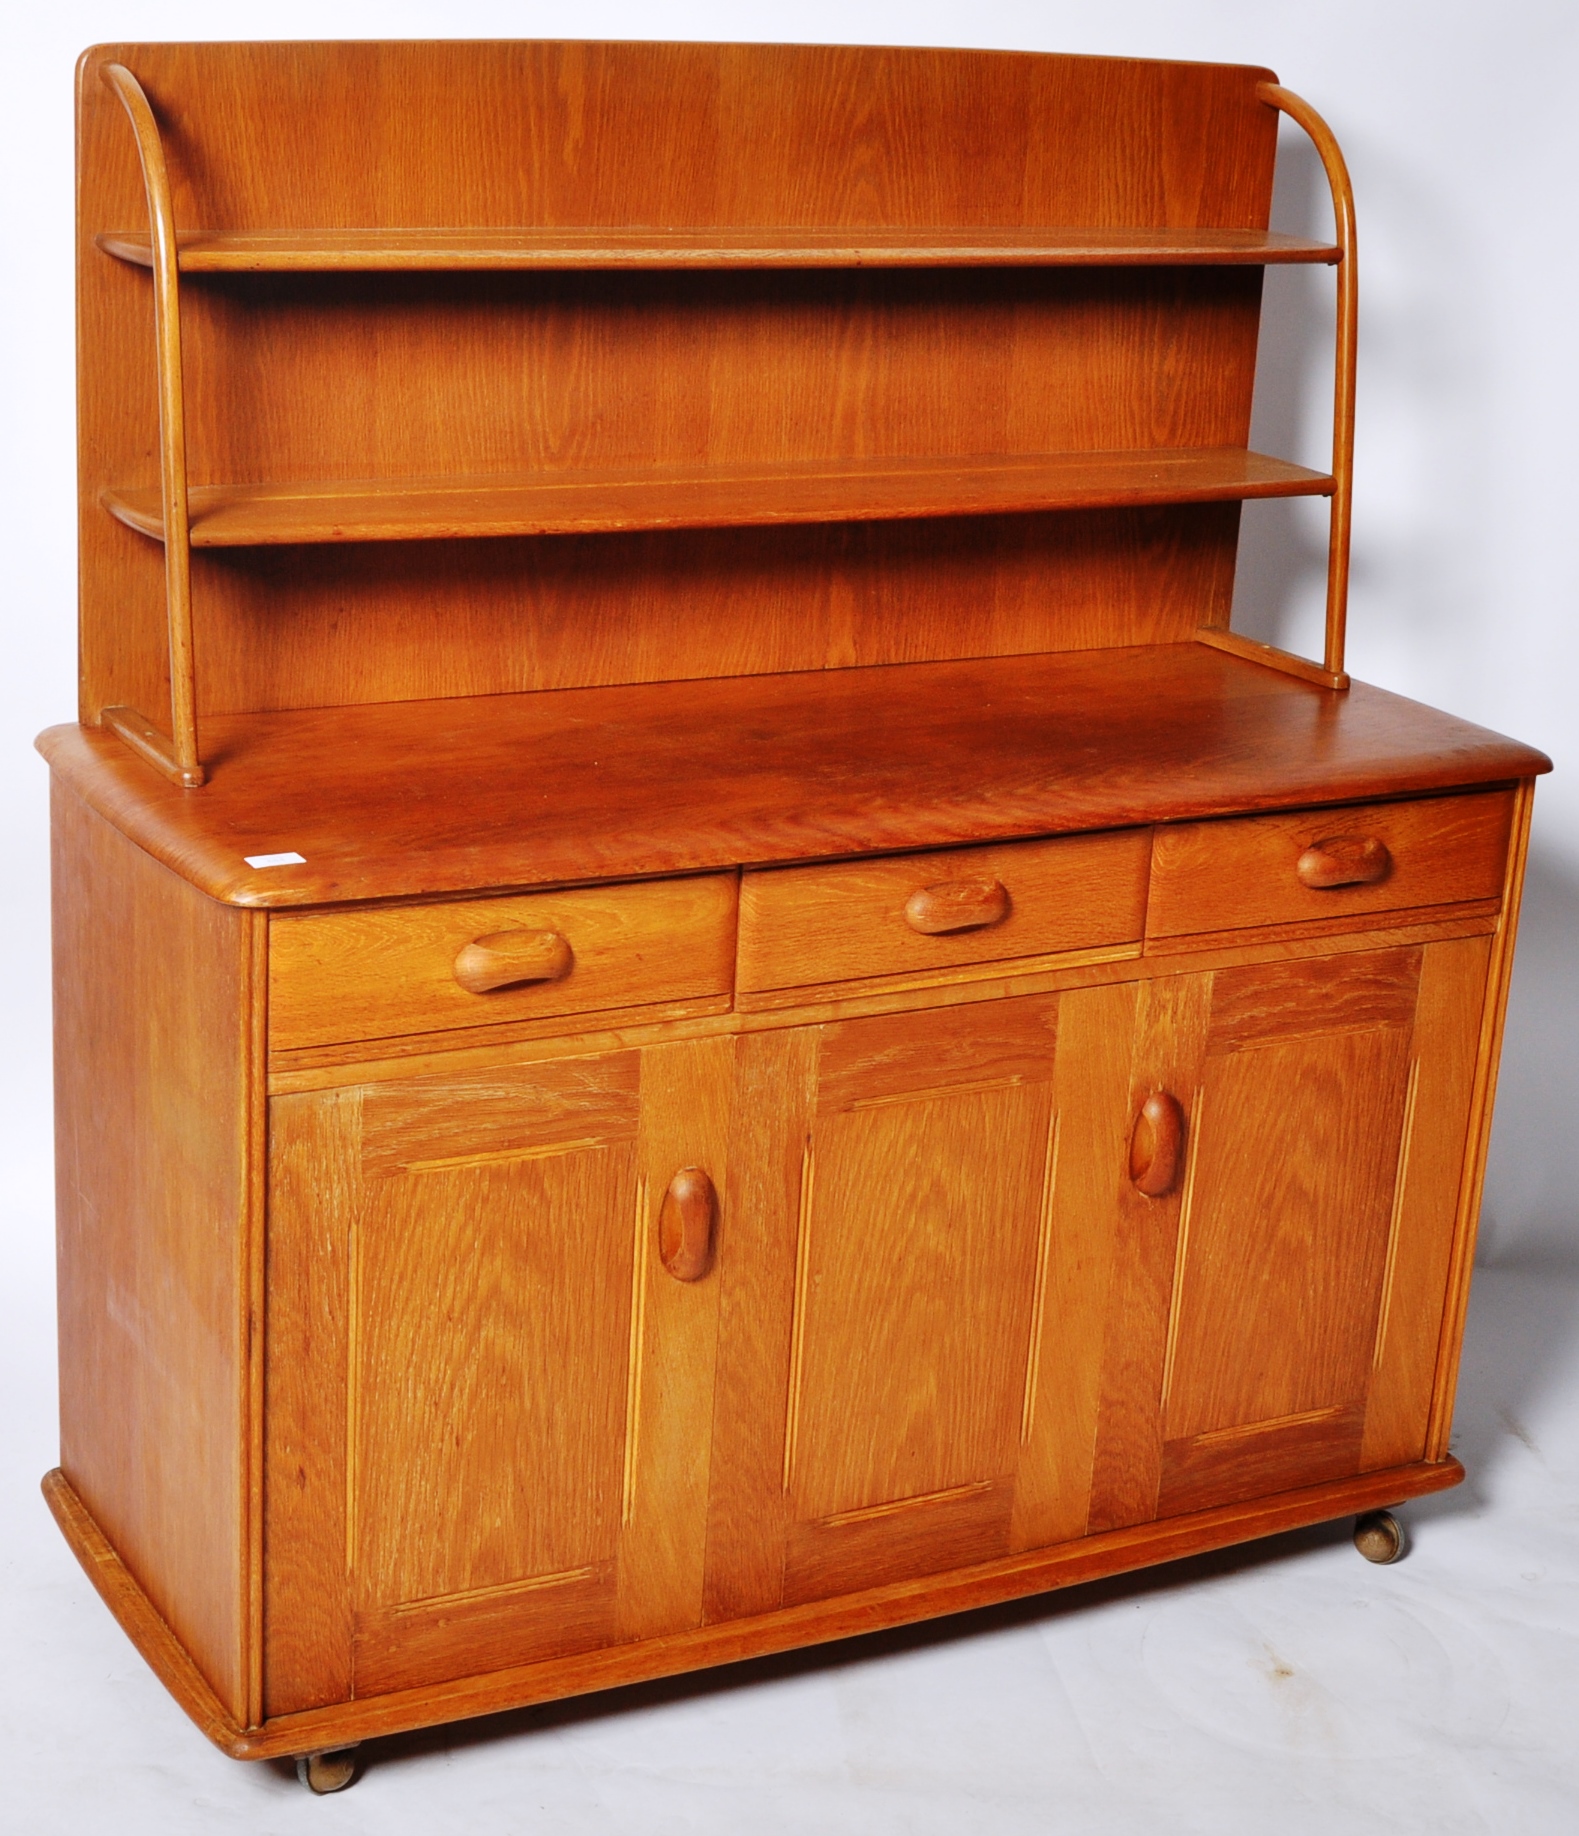 PRIORY BEECH & ELM KITCHEN DRESSER BASE WITH RACK TOP - Image 2 of 11